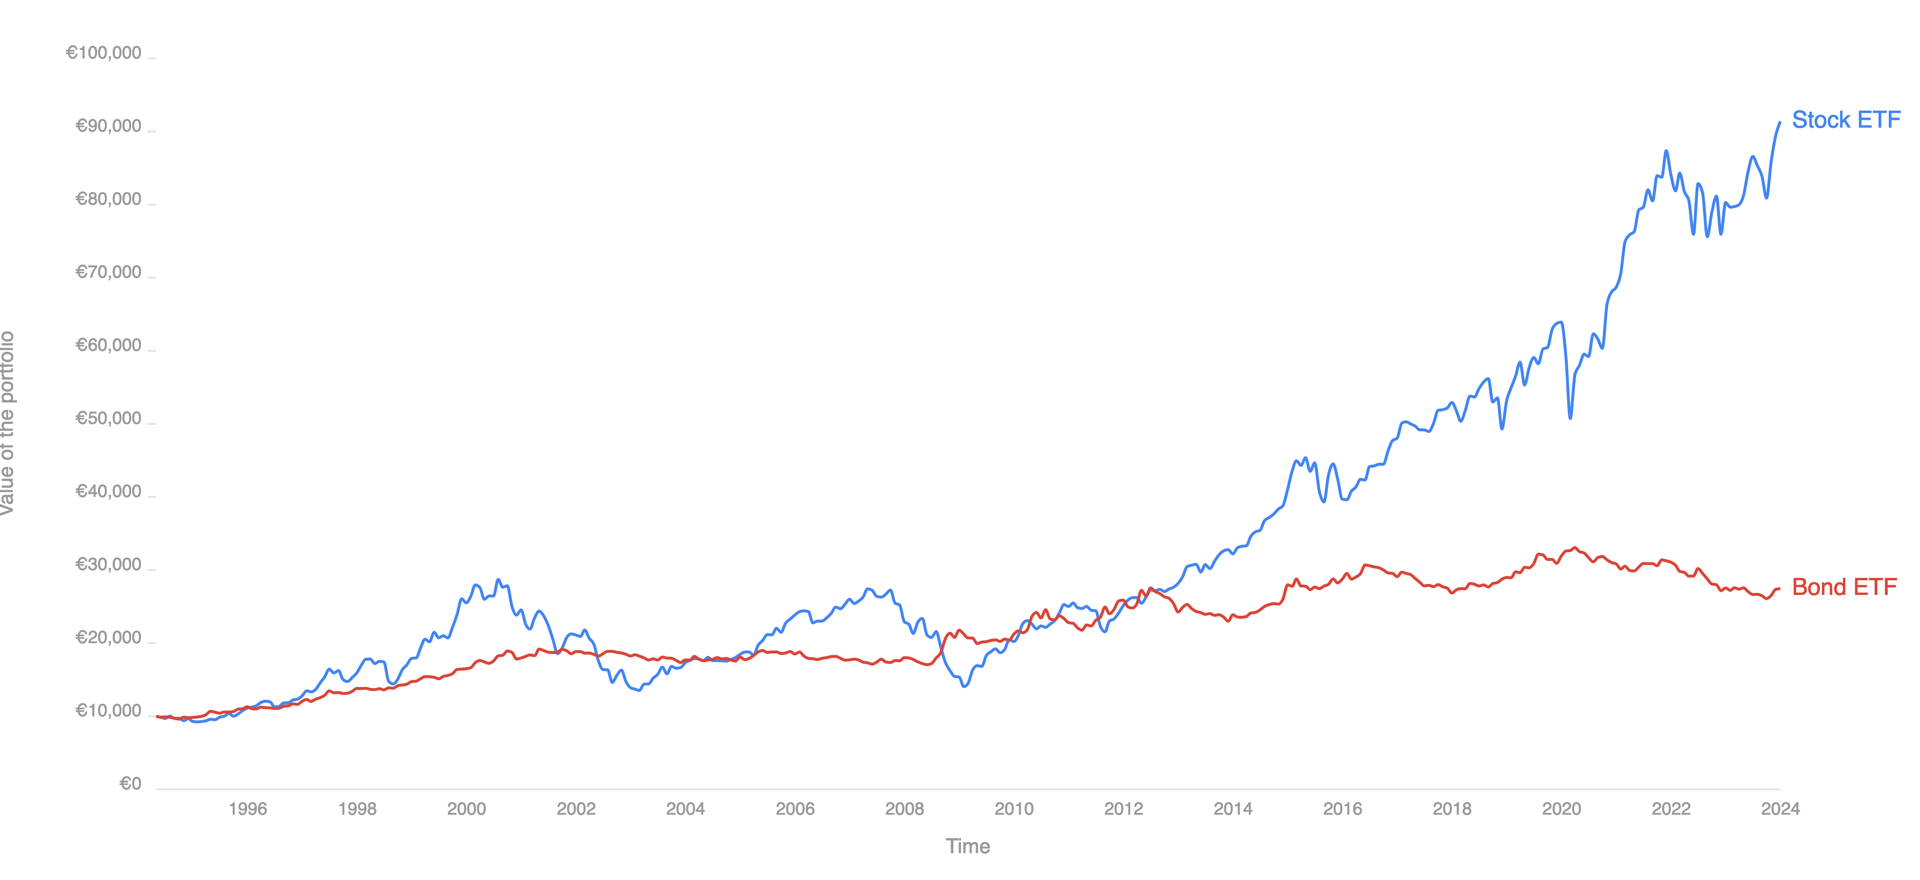 Historical performance of a stock ETF vs bond ETF between 1994 and 2024